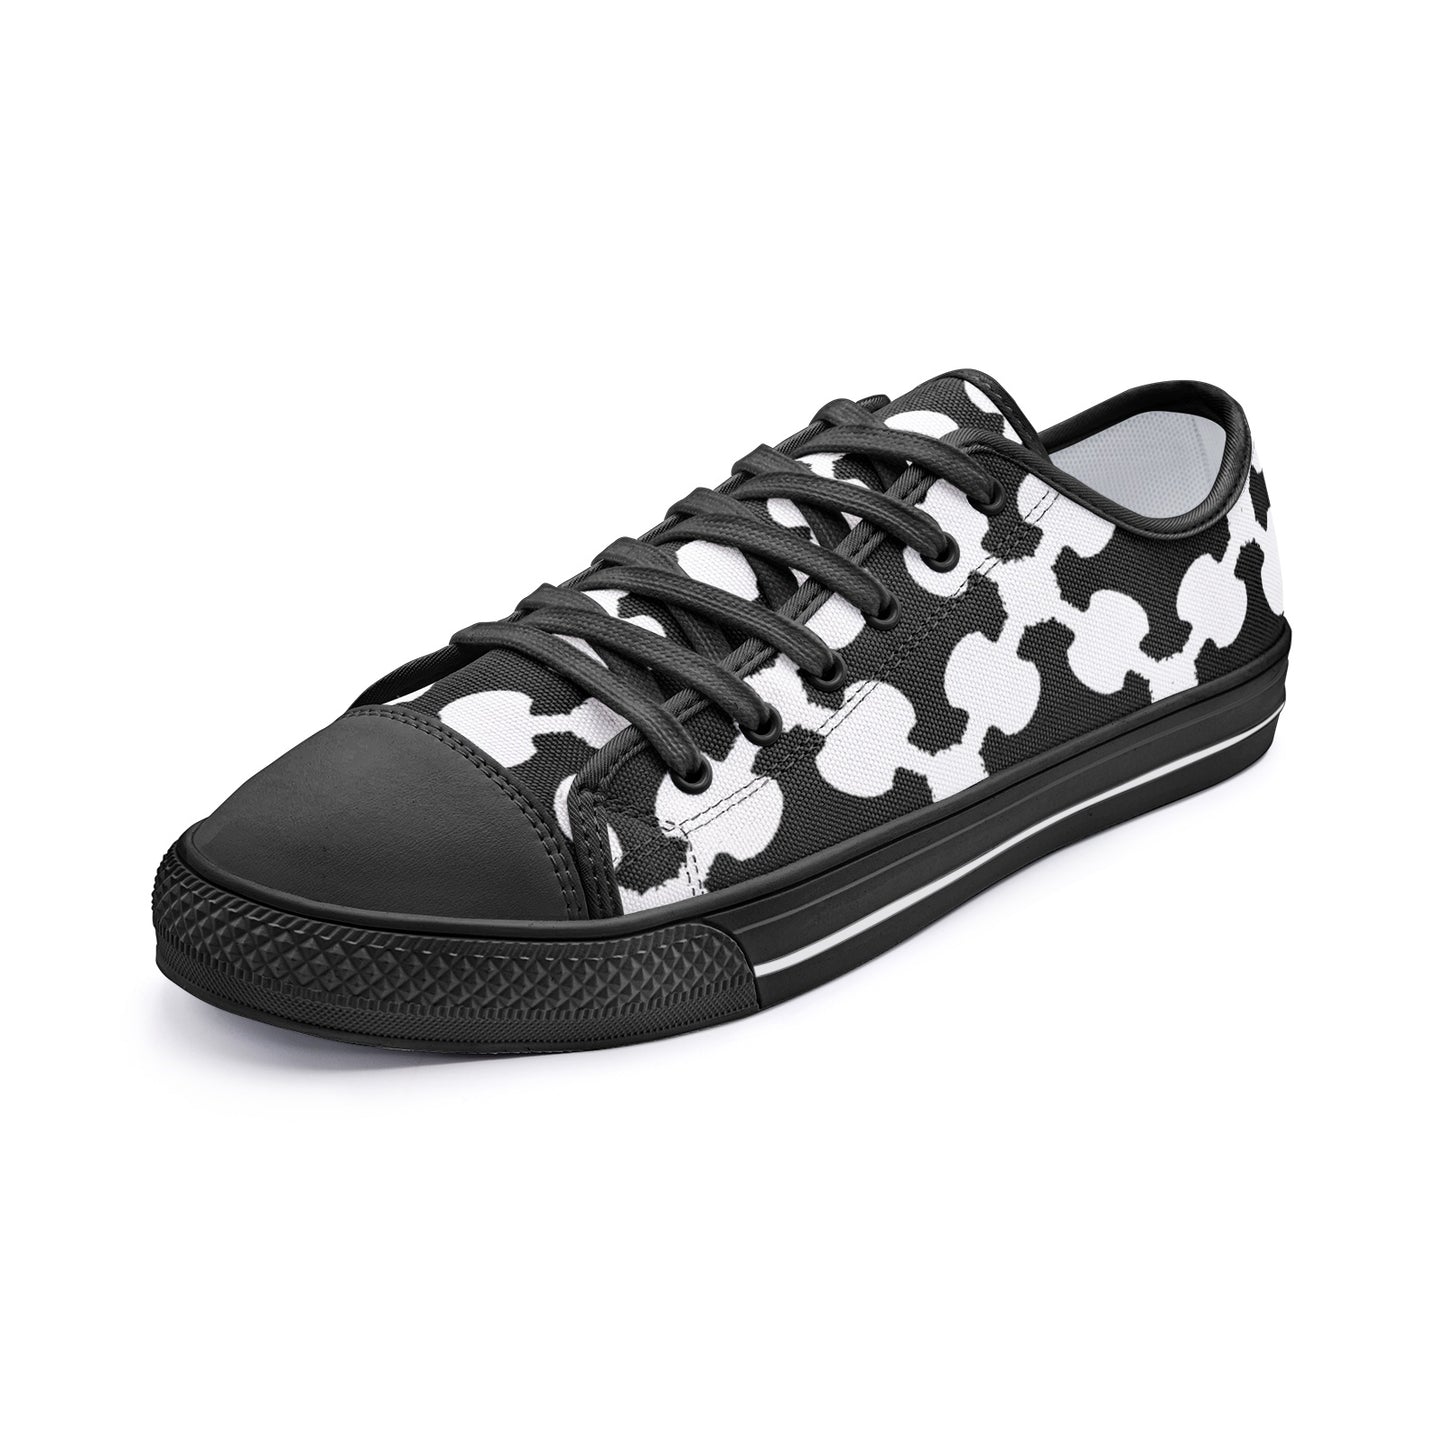 Abstract Unisex Low Top Canvas Shoes - O By Onica Online Store